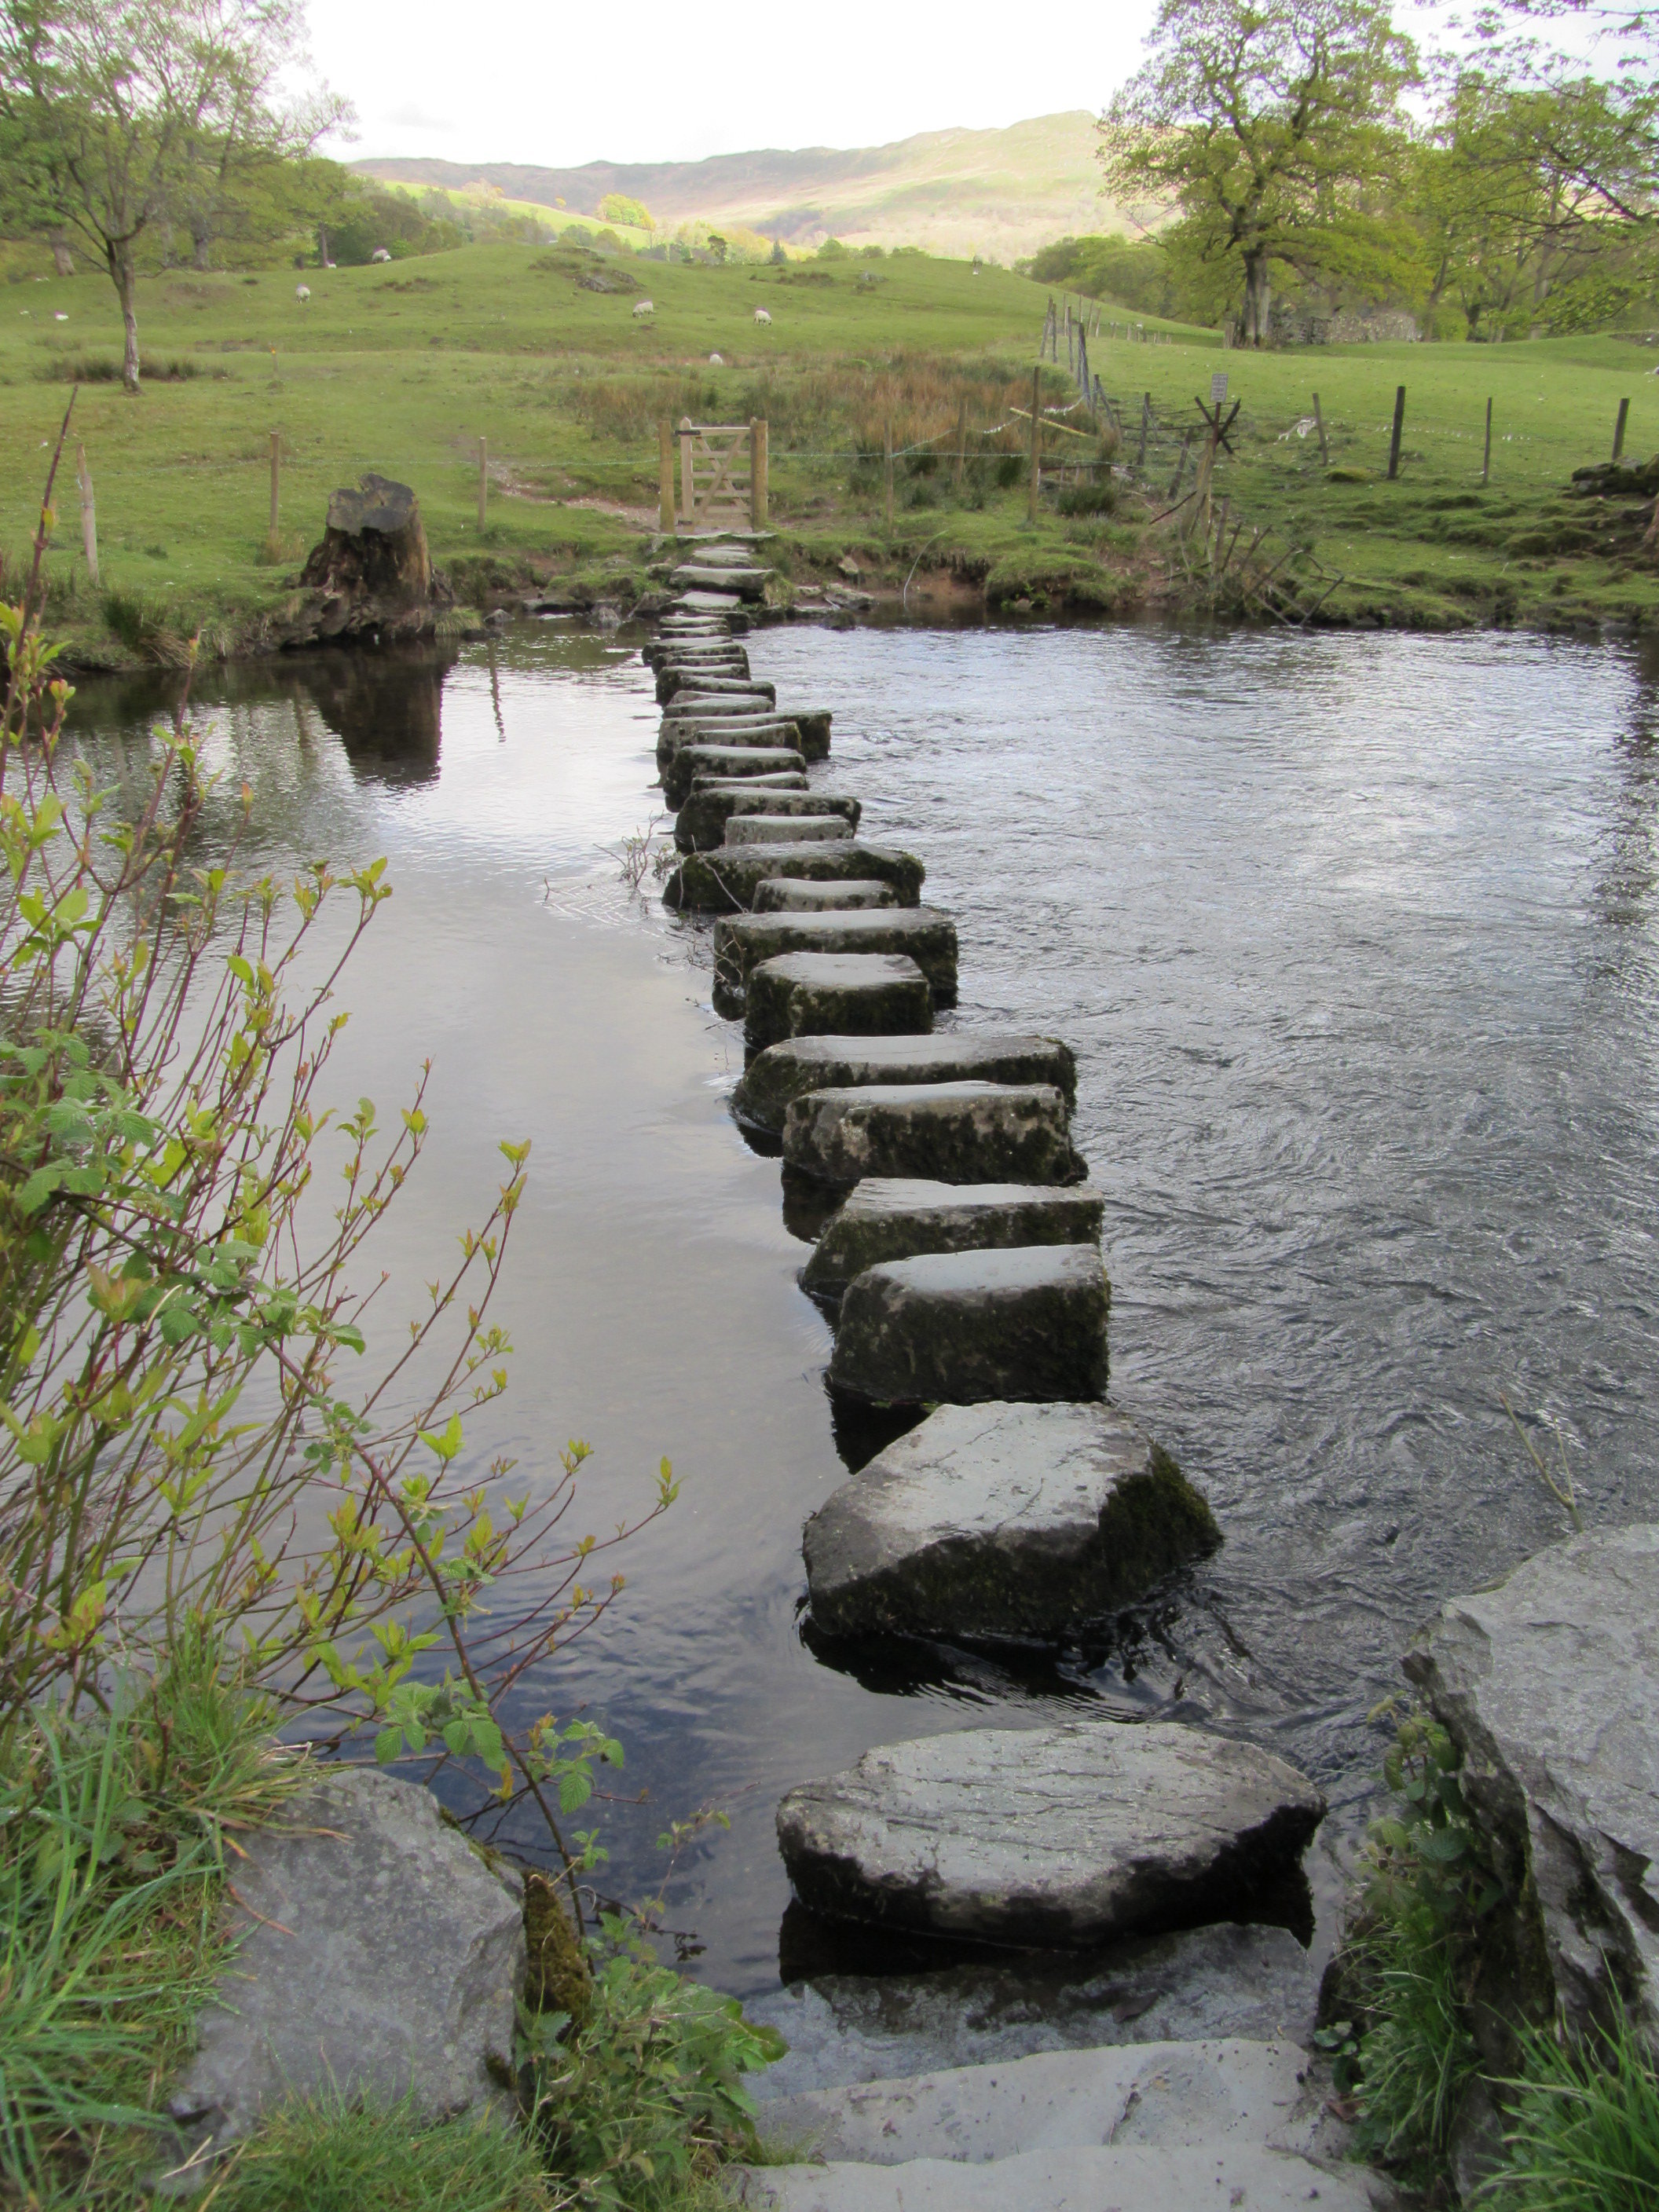 File:River Rothay stepping stones 120508w.jpg - Wikimedia Commons